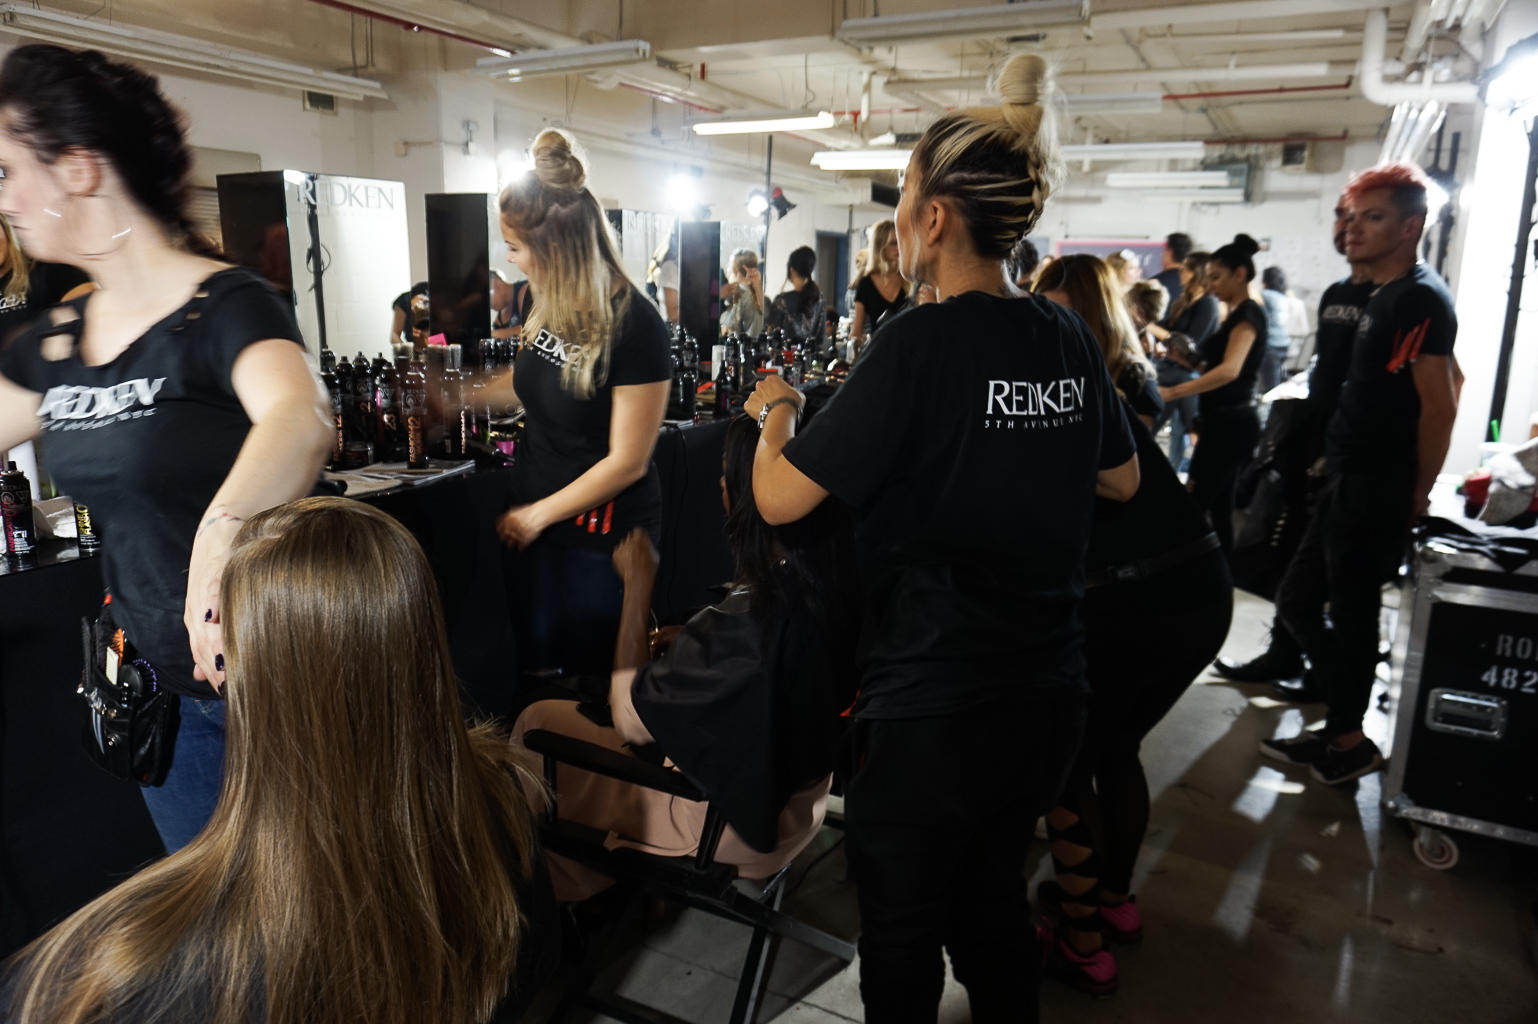 Read about my Redken Ready Experience at Toronto Women's Fashion Week with 1 Milk 2 Sugars!